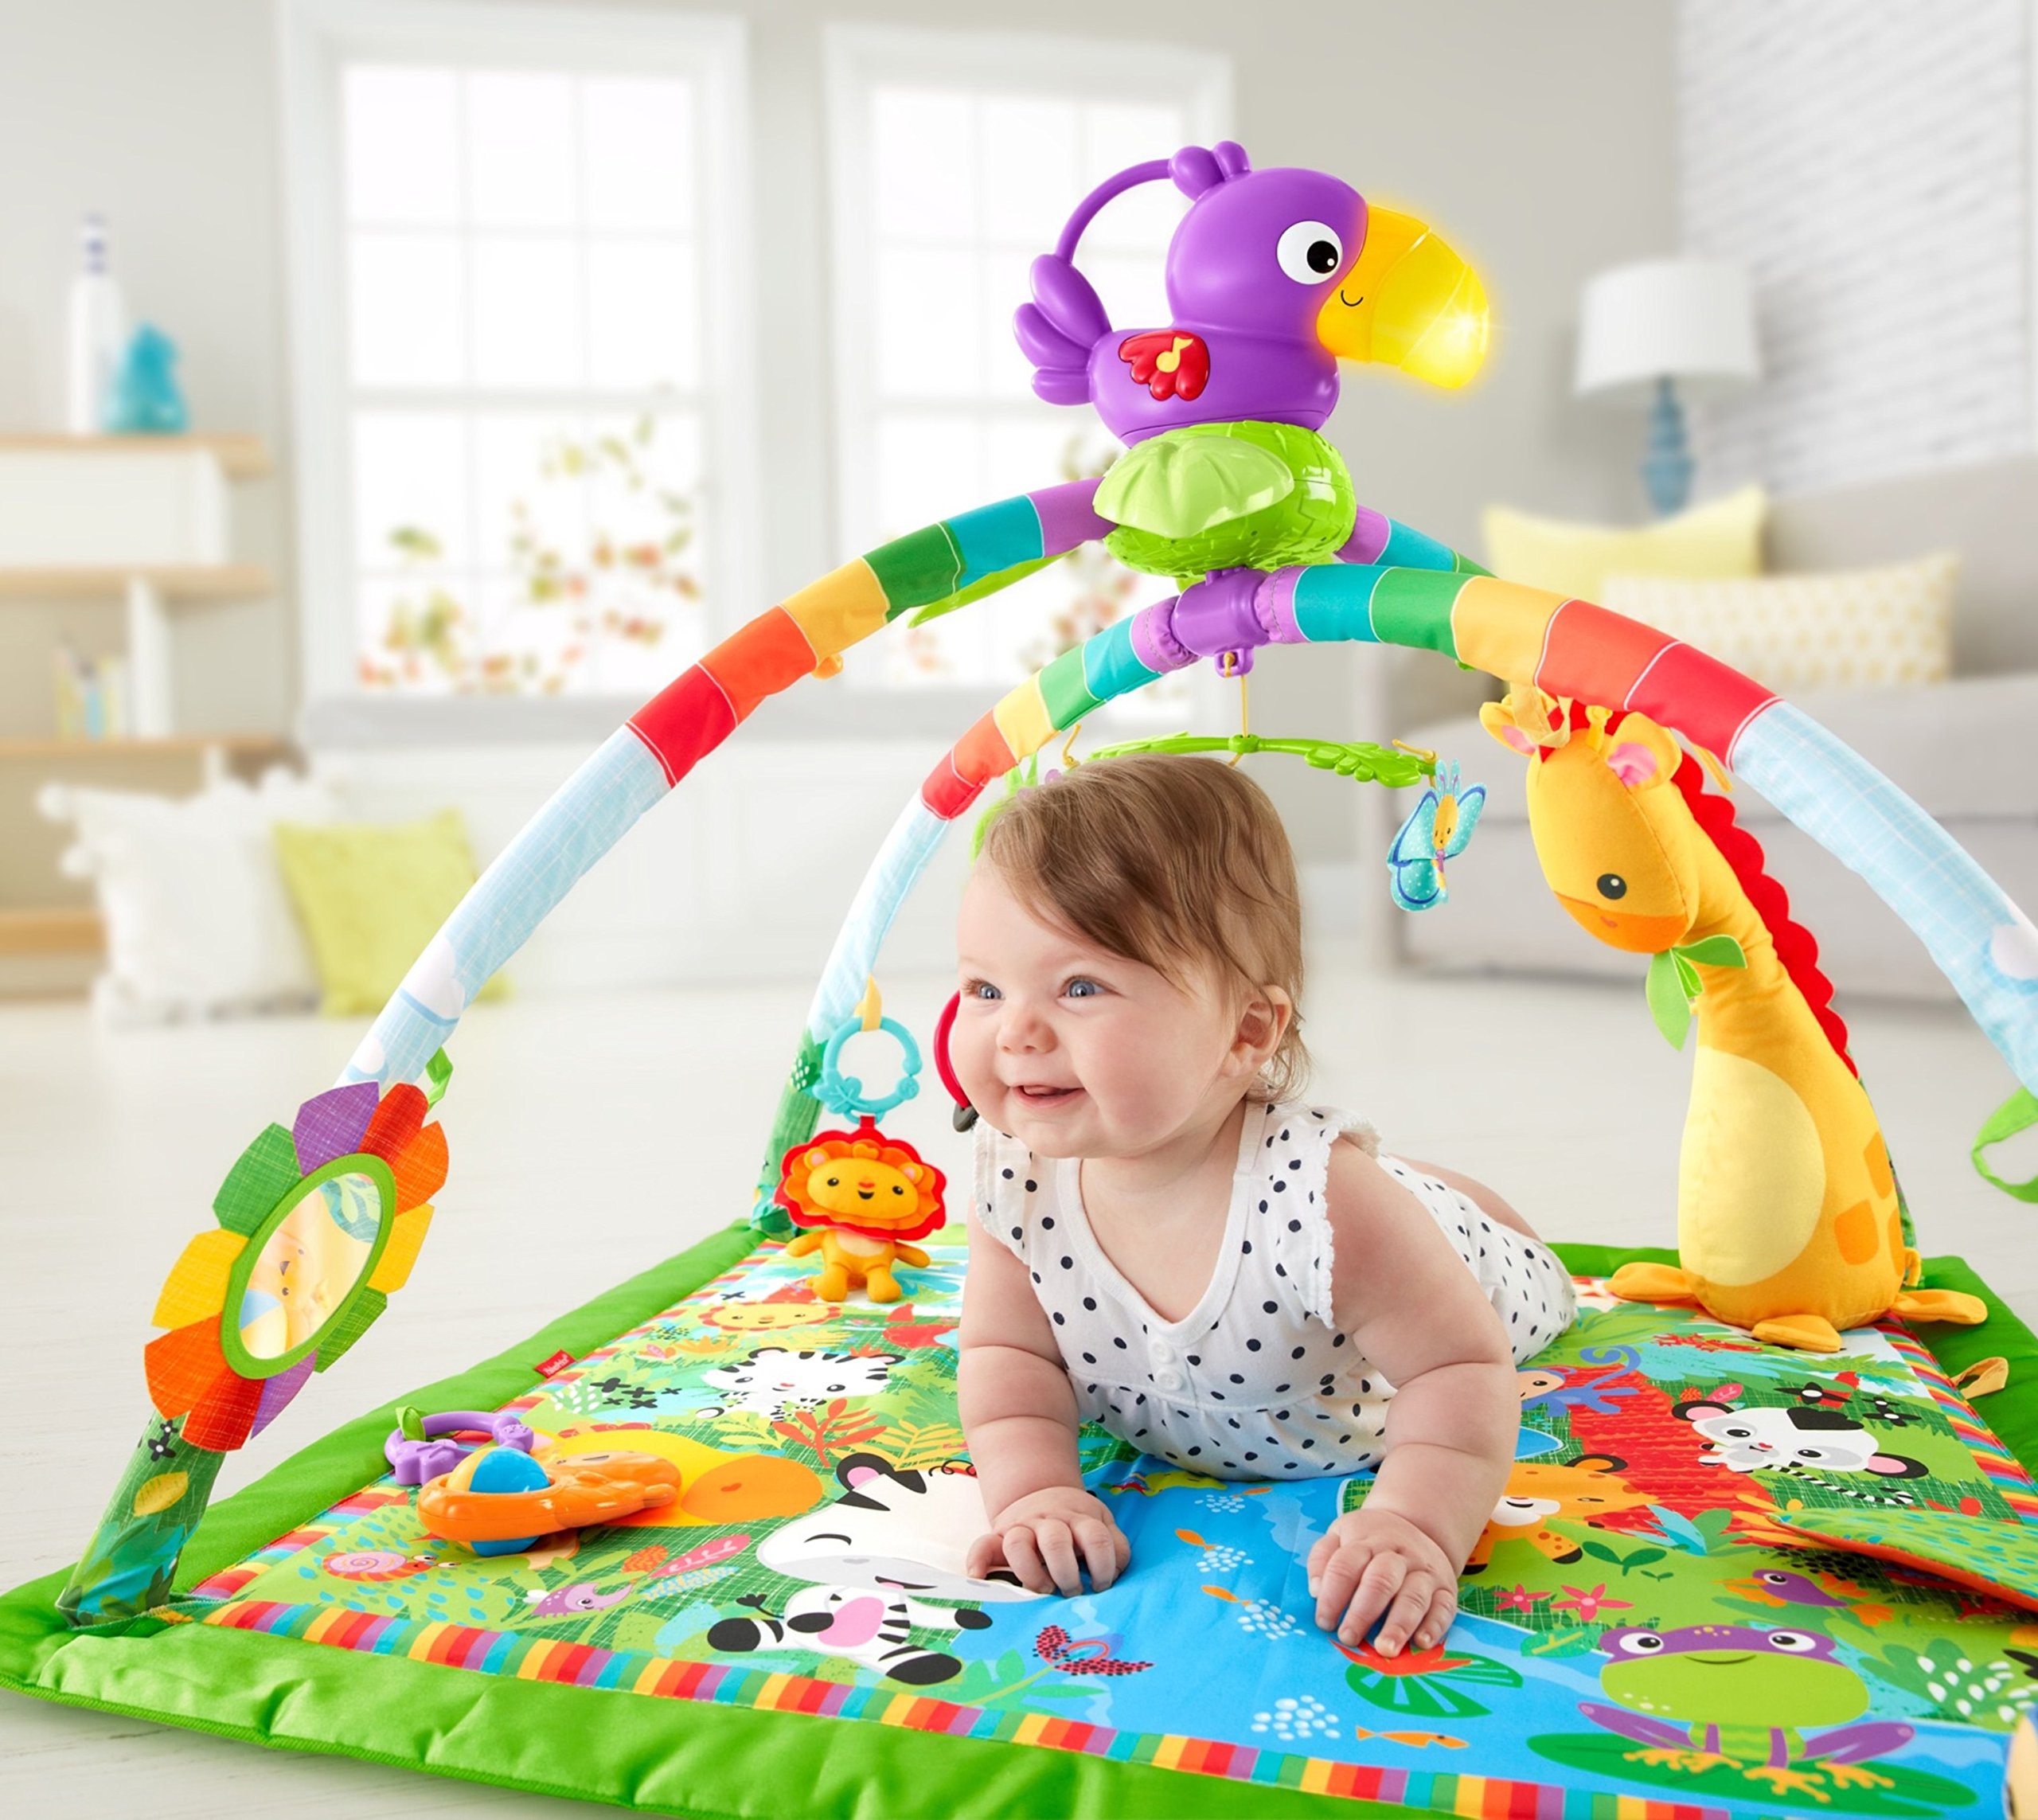 Fisher-Price Rainforest Music & Lights Deluxe Infant Gym